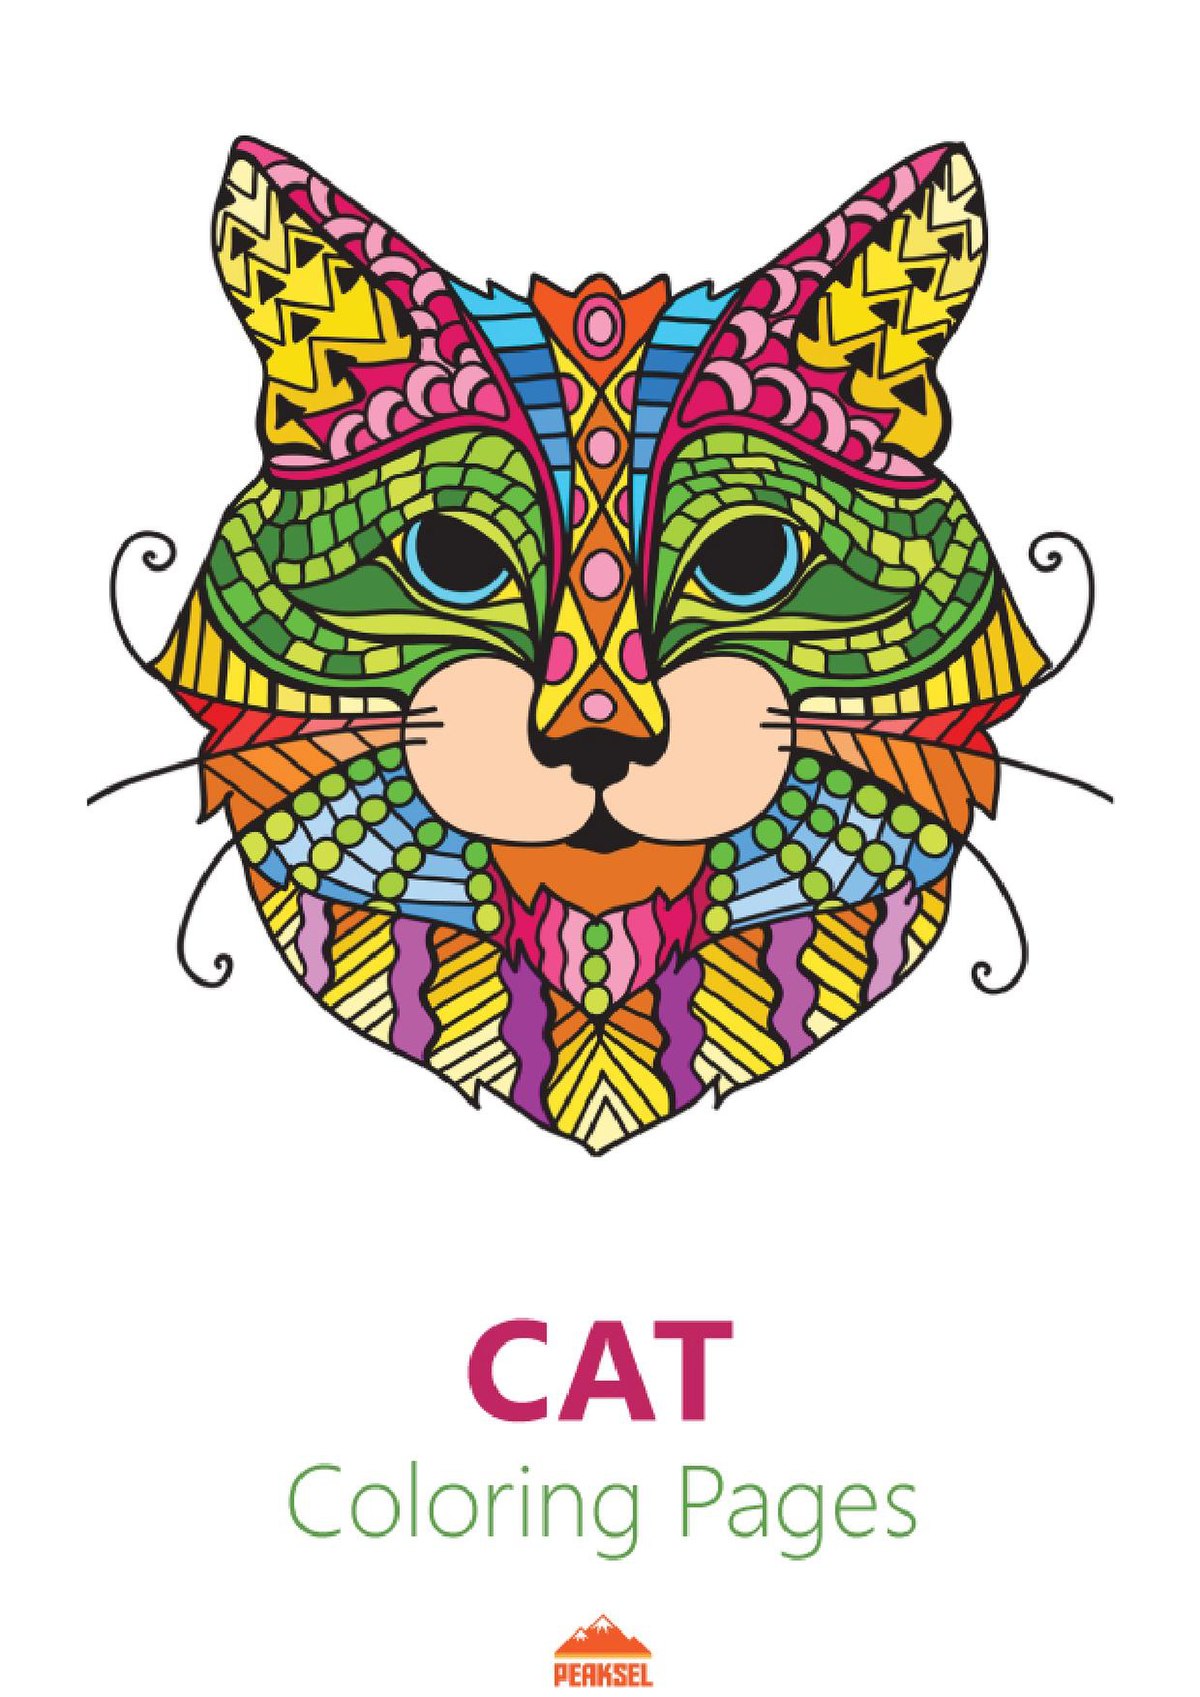 Download File:Cat Coloring Pages For Adults - Printable Coloring Book.pdf - Wikimedia Commons